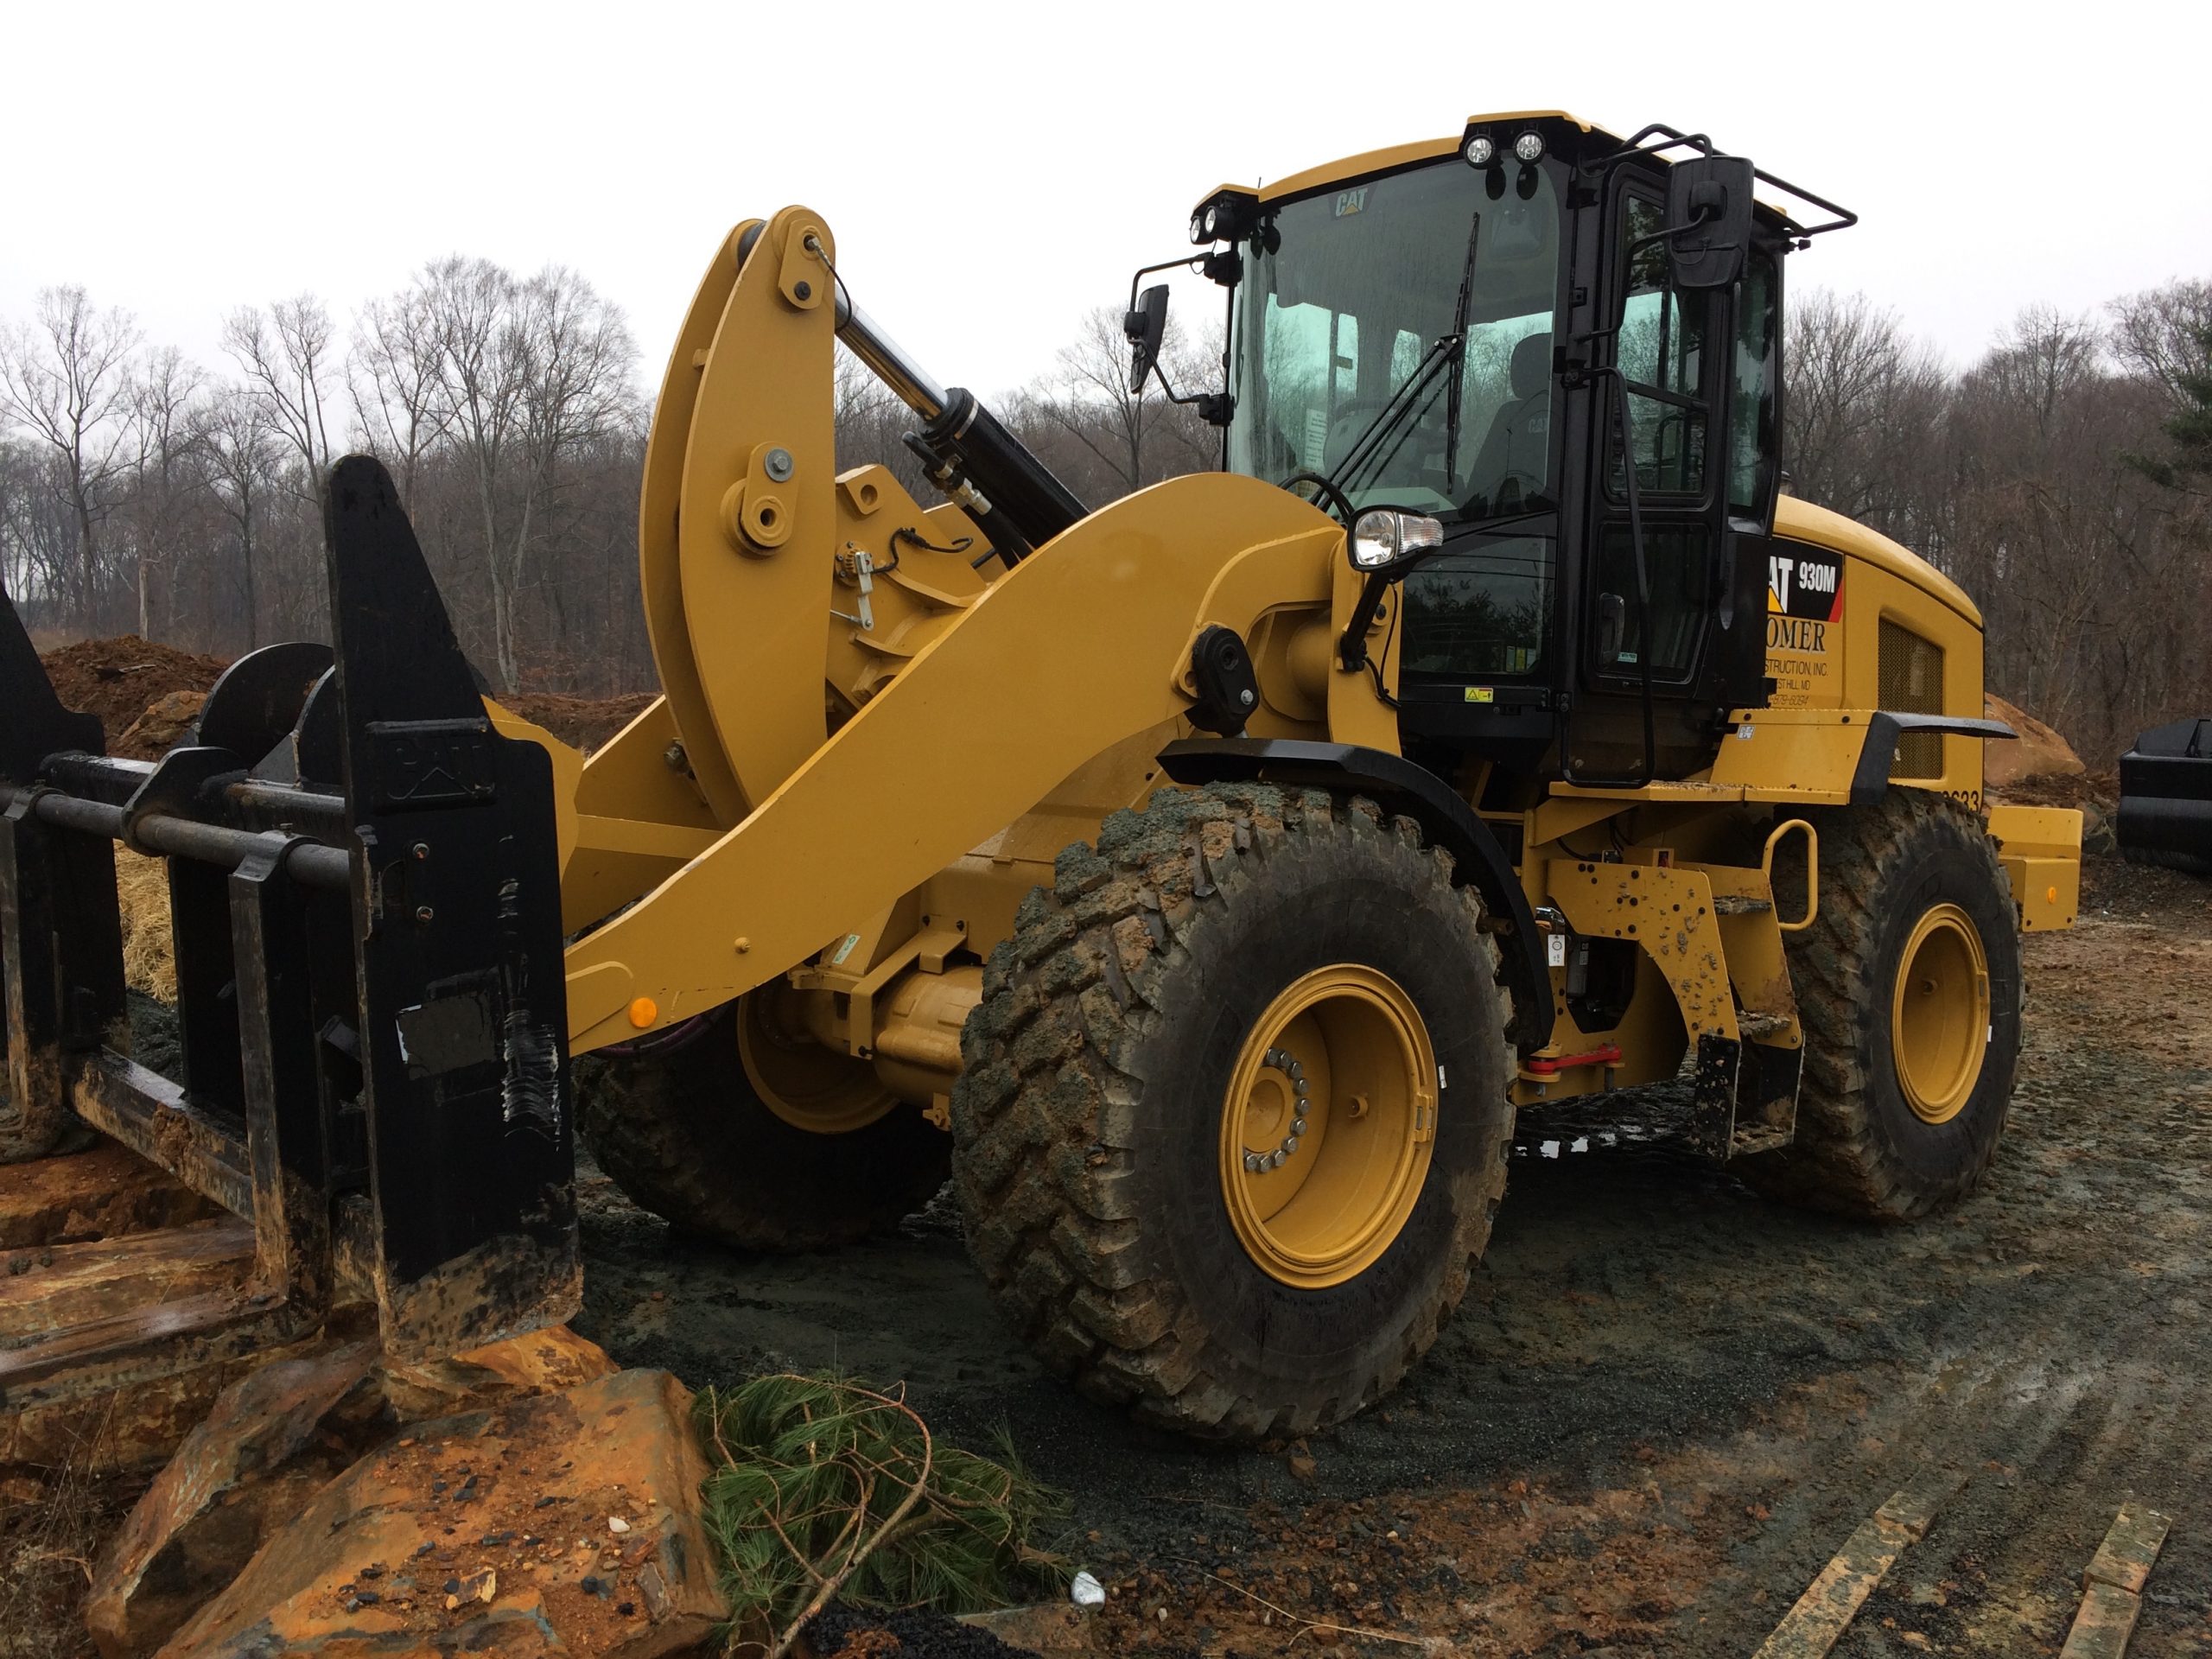 CAT Rubber Tire Loader working in the dirt preparing a site for construction